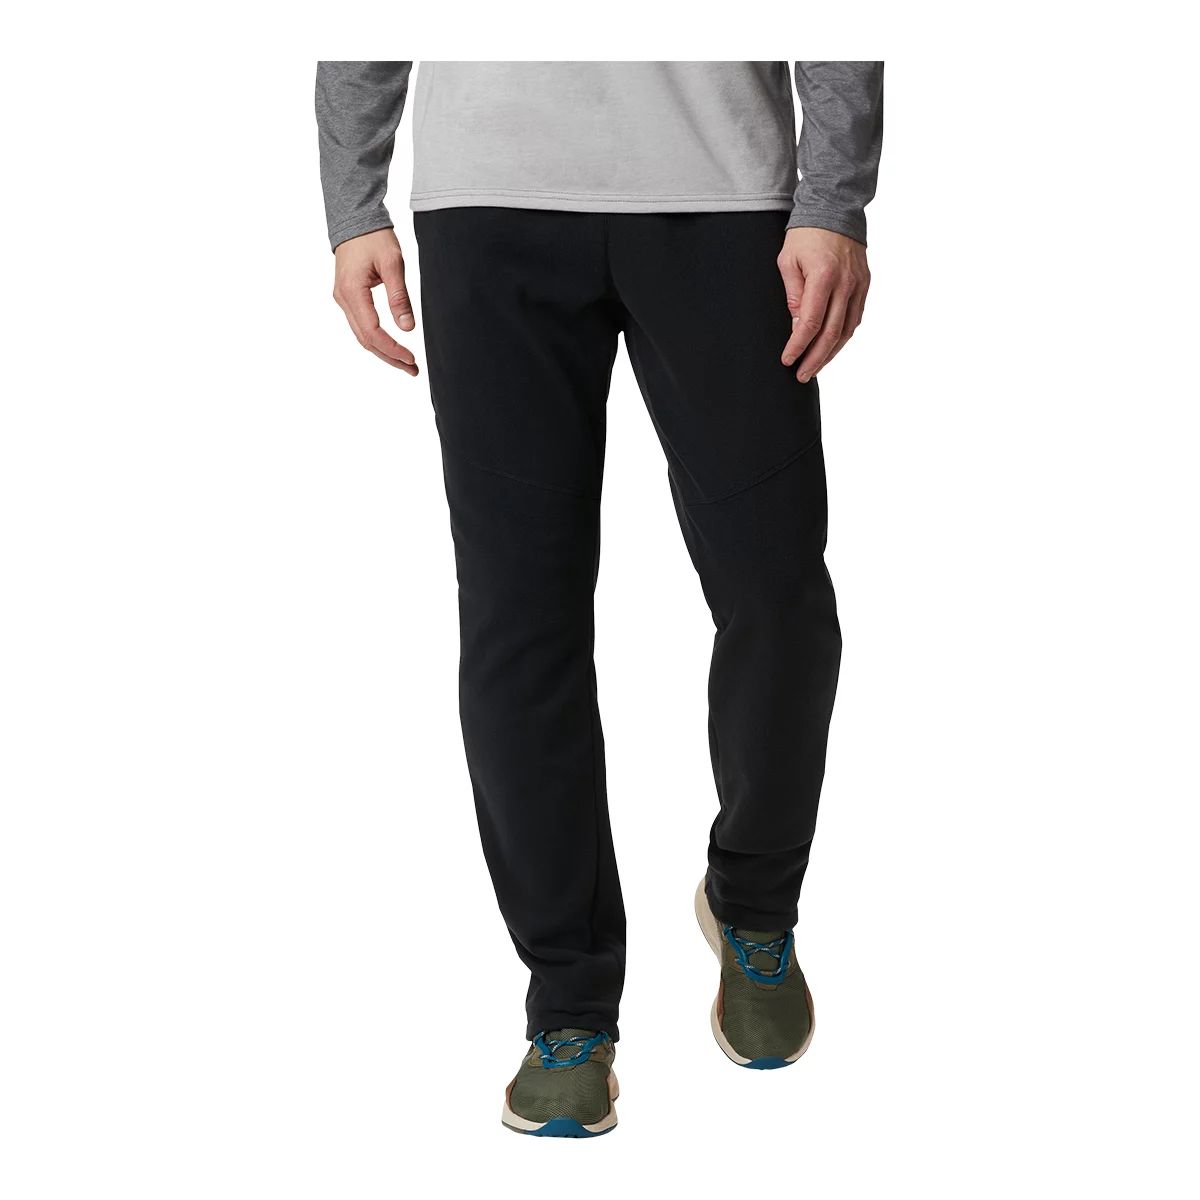 Image of Columbia Men's Rapid Expedition Pants